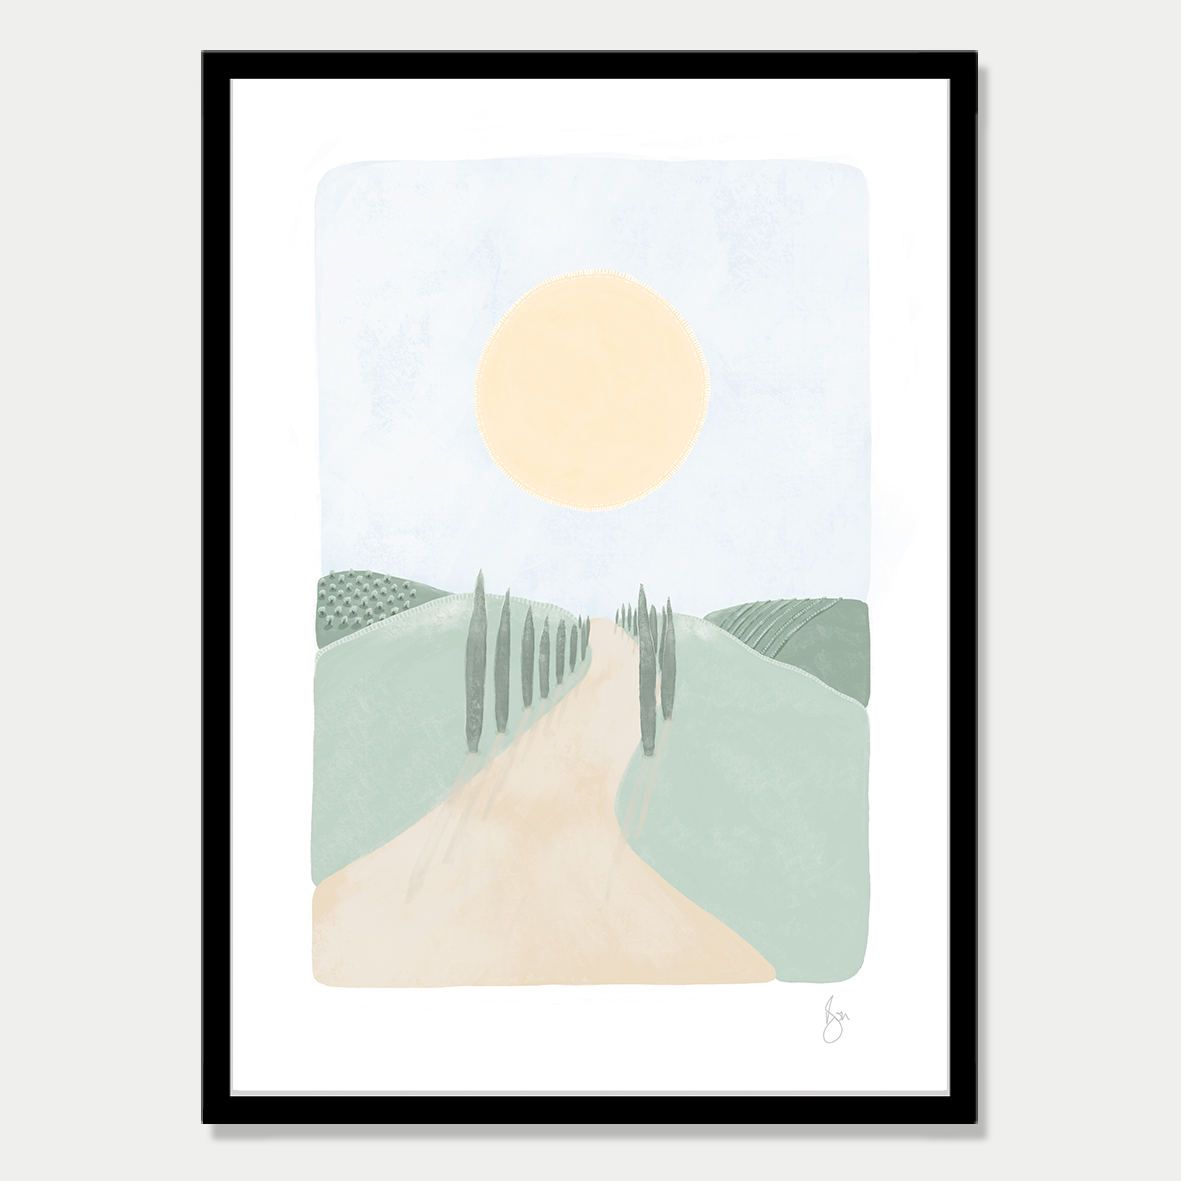 Art print of the Tuscan countryside with a large sun, by Bon Jung. Printed in New Zealand by endemicworld and framed in black.